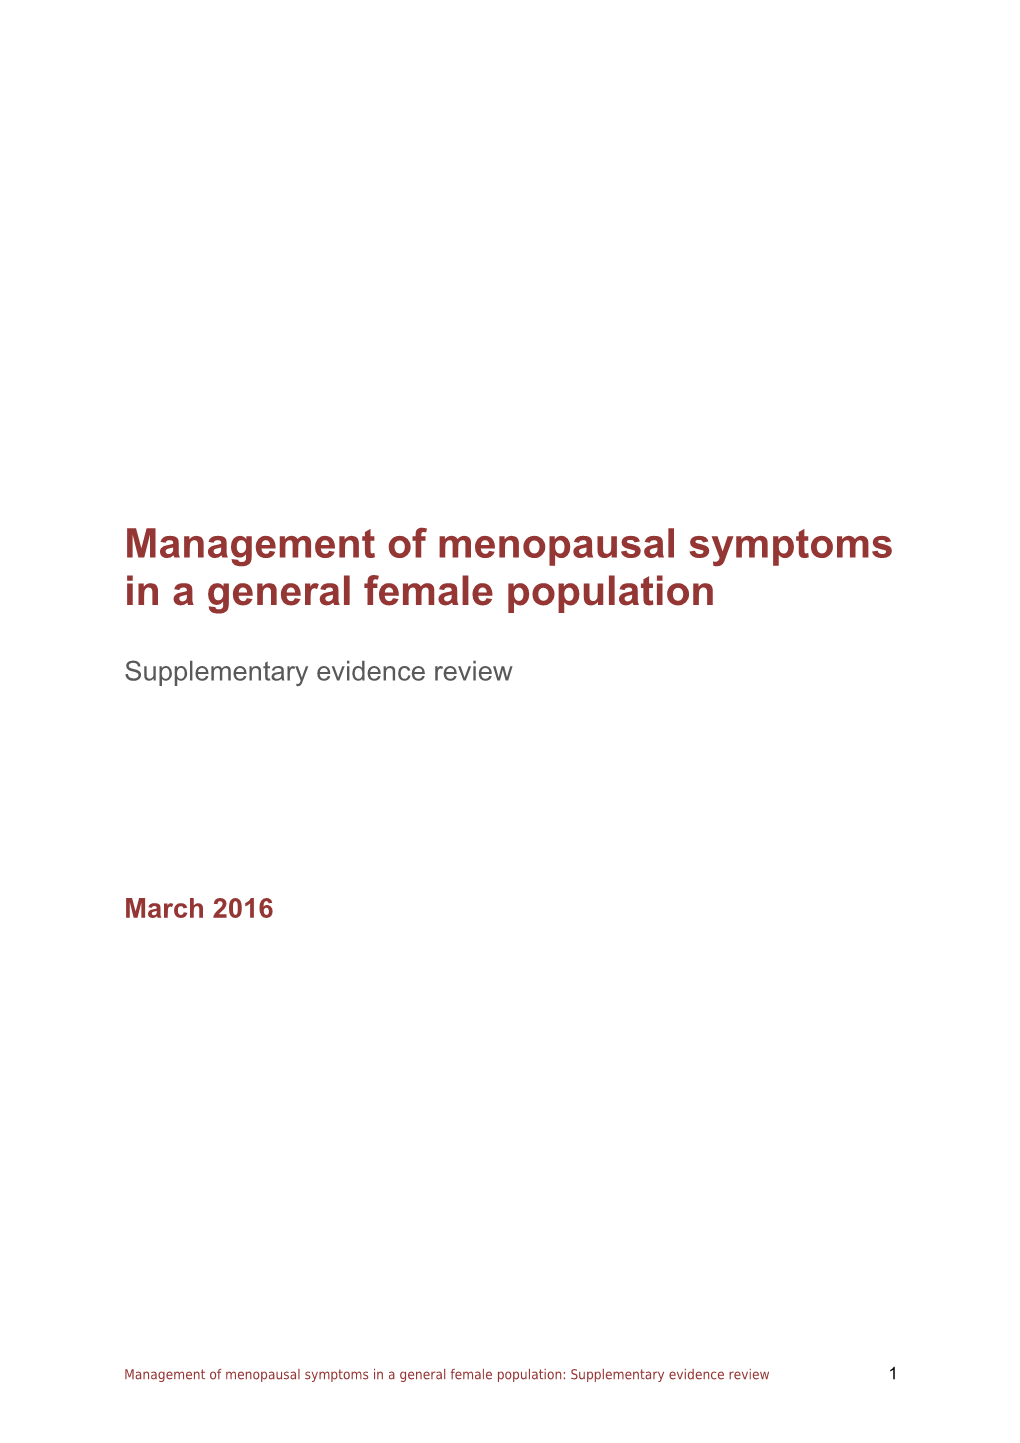 Management of Menopausal Symptoms in a General Female Population